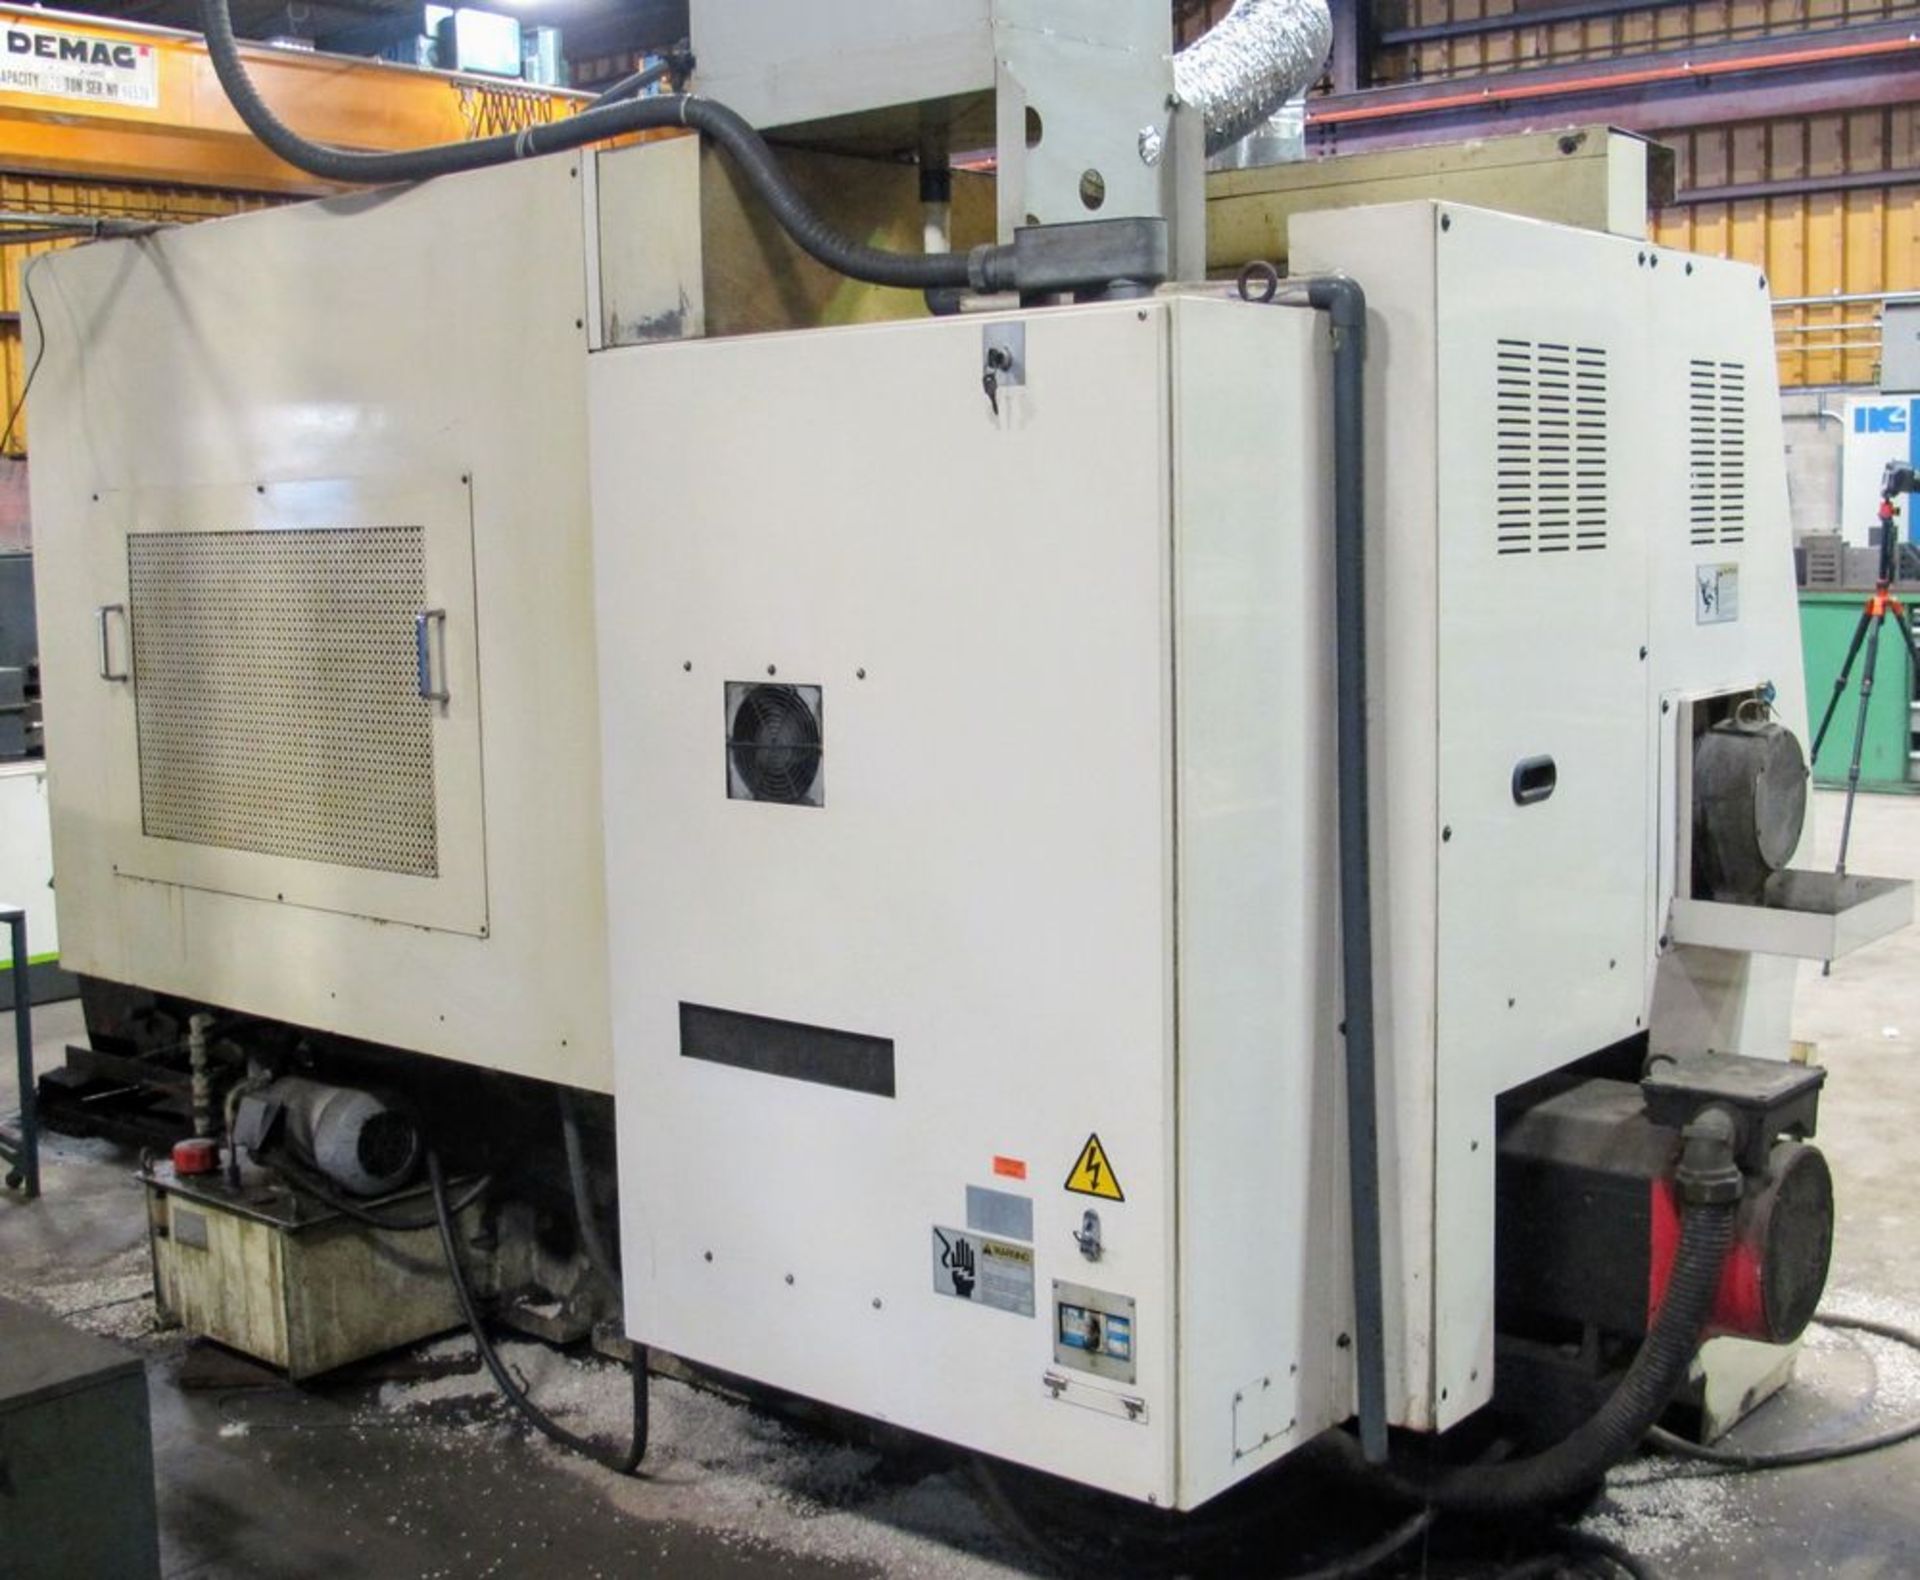 NAKAMURA-TOME SC-300 CNC Lathe, Fanuc Series 21-T CNC Control, 10” 3-Jaw Chuck, Tailstock, Turret, - Image 11 of 13